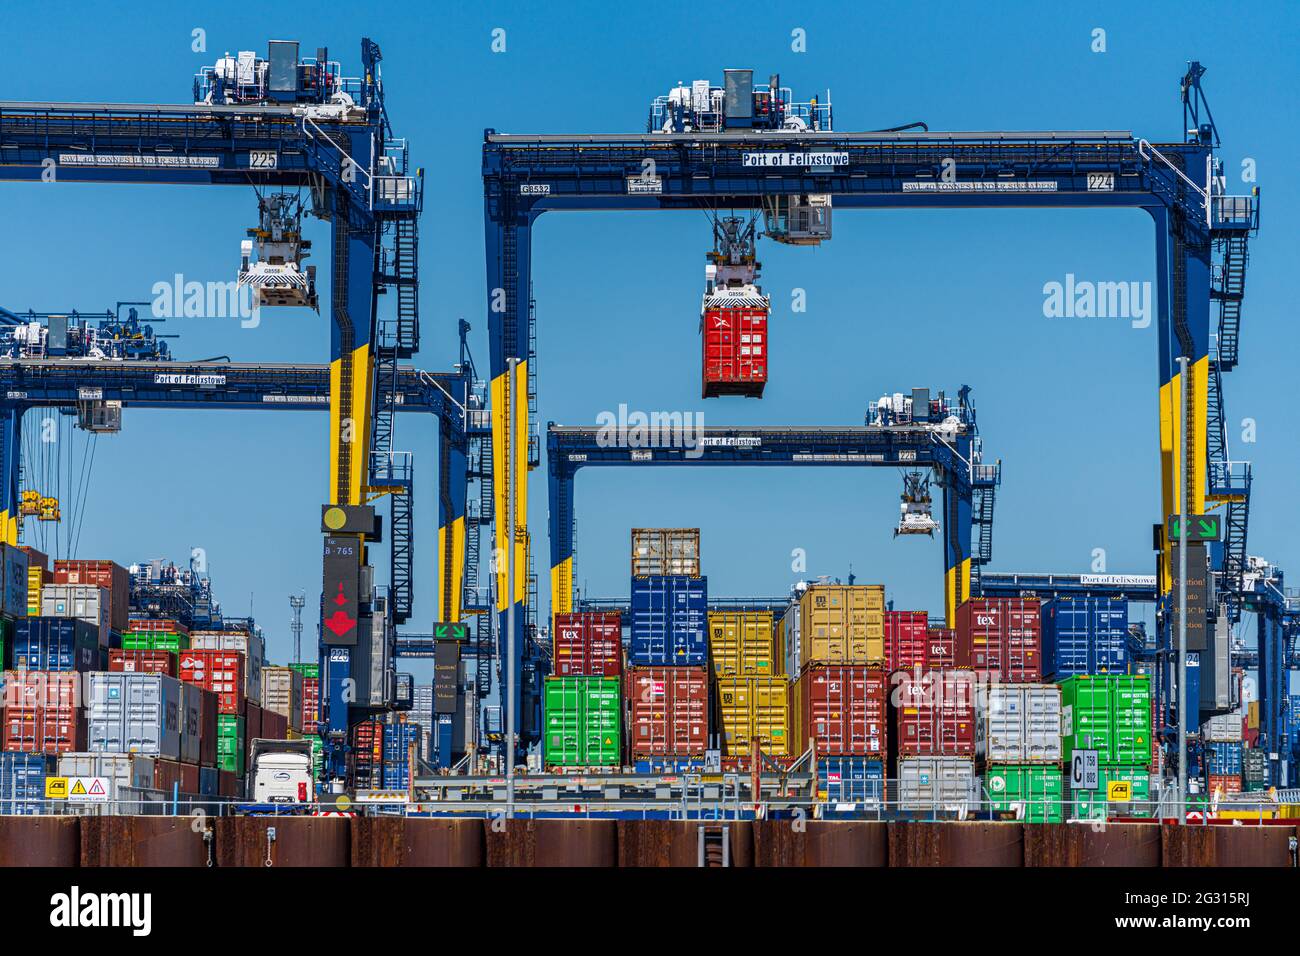 Global Supply Chains - Containers stacked on the dockside at the Port of Felixstowe UK. Global Supply Chain Congestion. Stock Photo